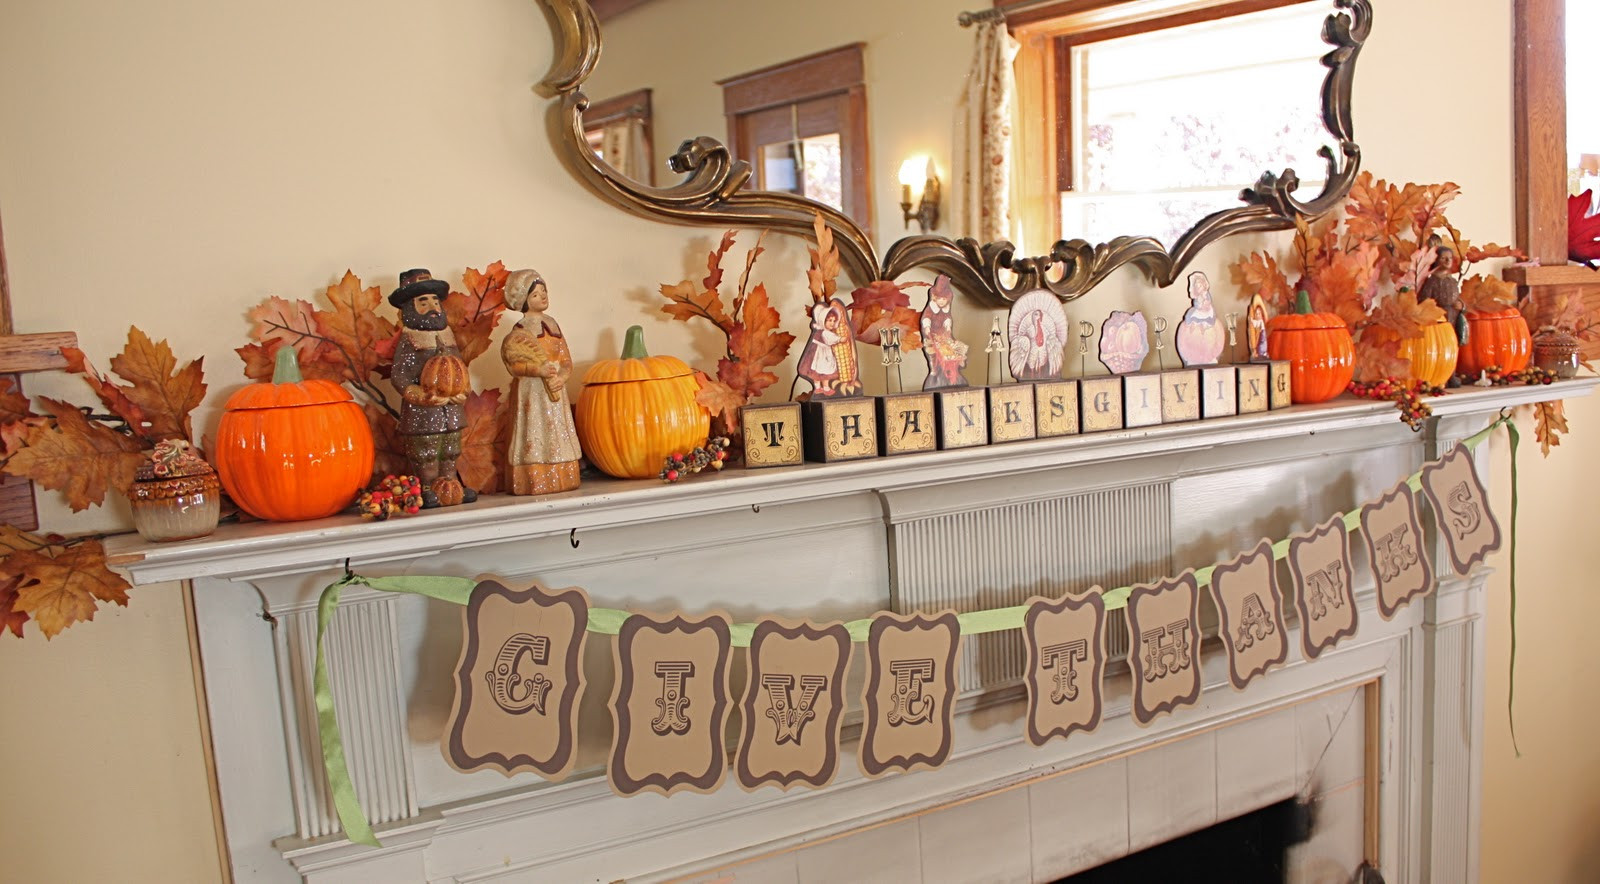 Turkey Designs For Thanksgiving
 At Second Street Thanksgiving mantel and other decor